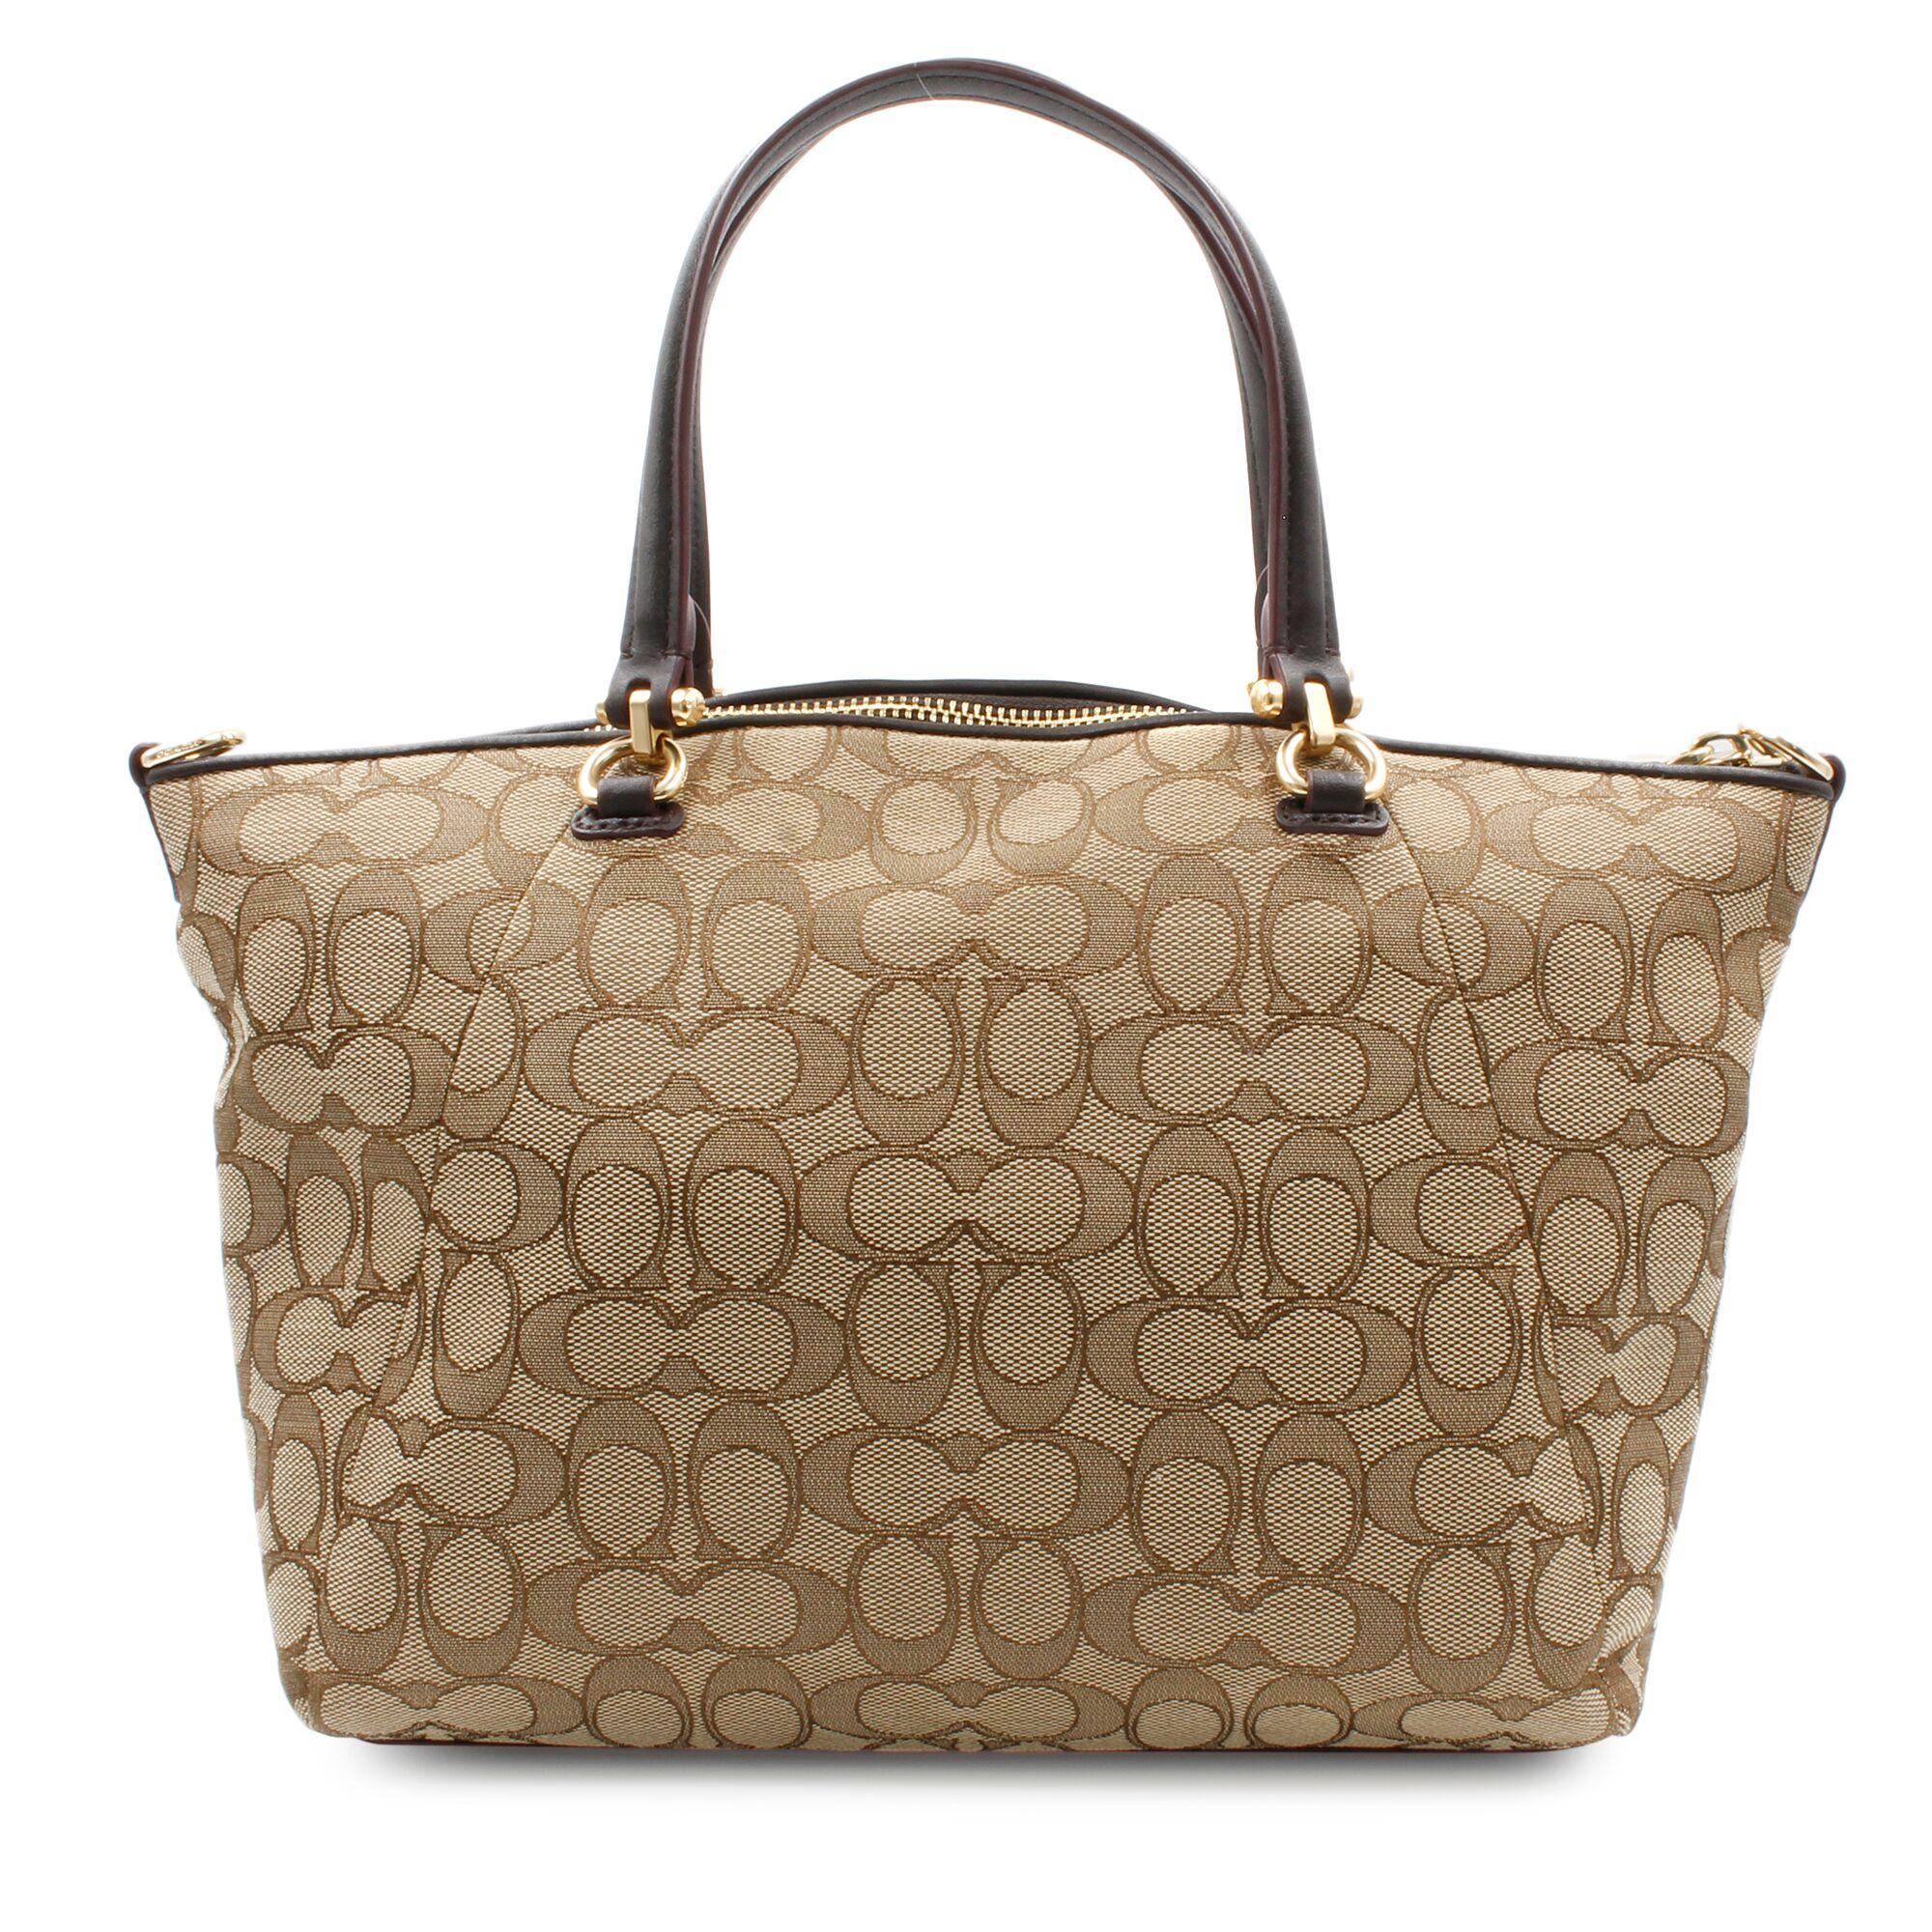 New Without Tags
Coach Signature Prairie Satchel Li/Khaki/Brown Women's Handbag.
Updated in a graphic mix of custom-woven jacquard and smooth contrast leather, gracefully curved shape distills the satchel to its purest form. Very refined hardware